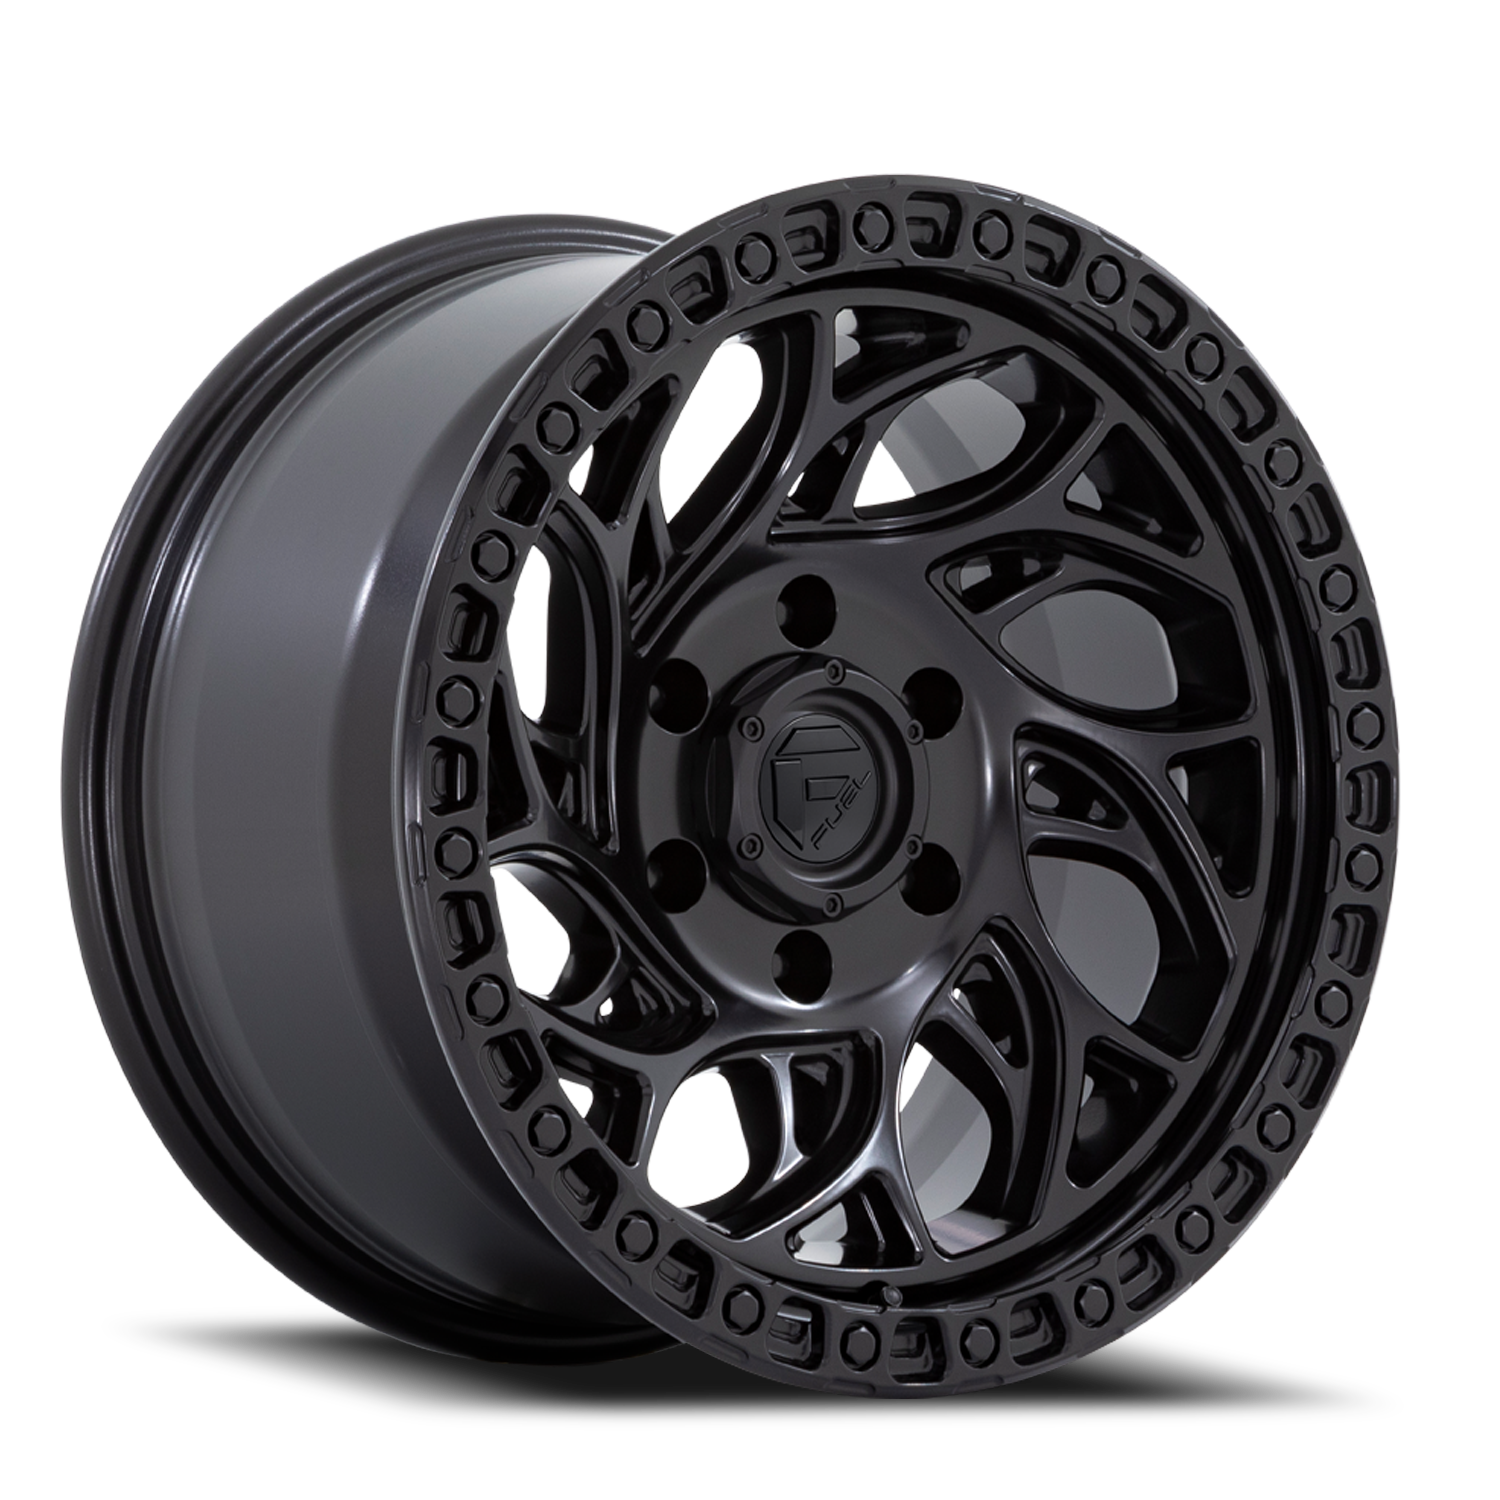 Aluminum Wheels 20X9 Runner OR D852 5 On 150 Blackout 110.1 Bore 1 Offset Fuel Off Road Wheels